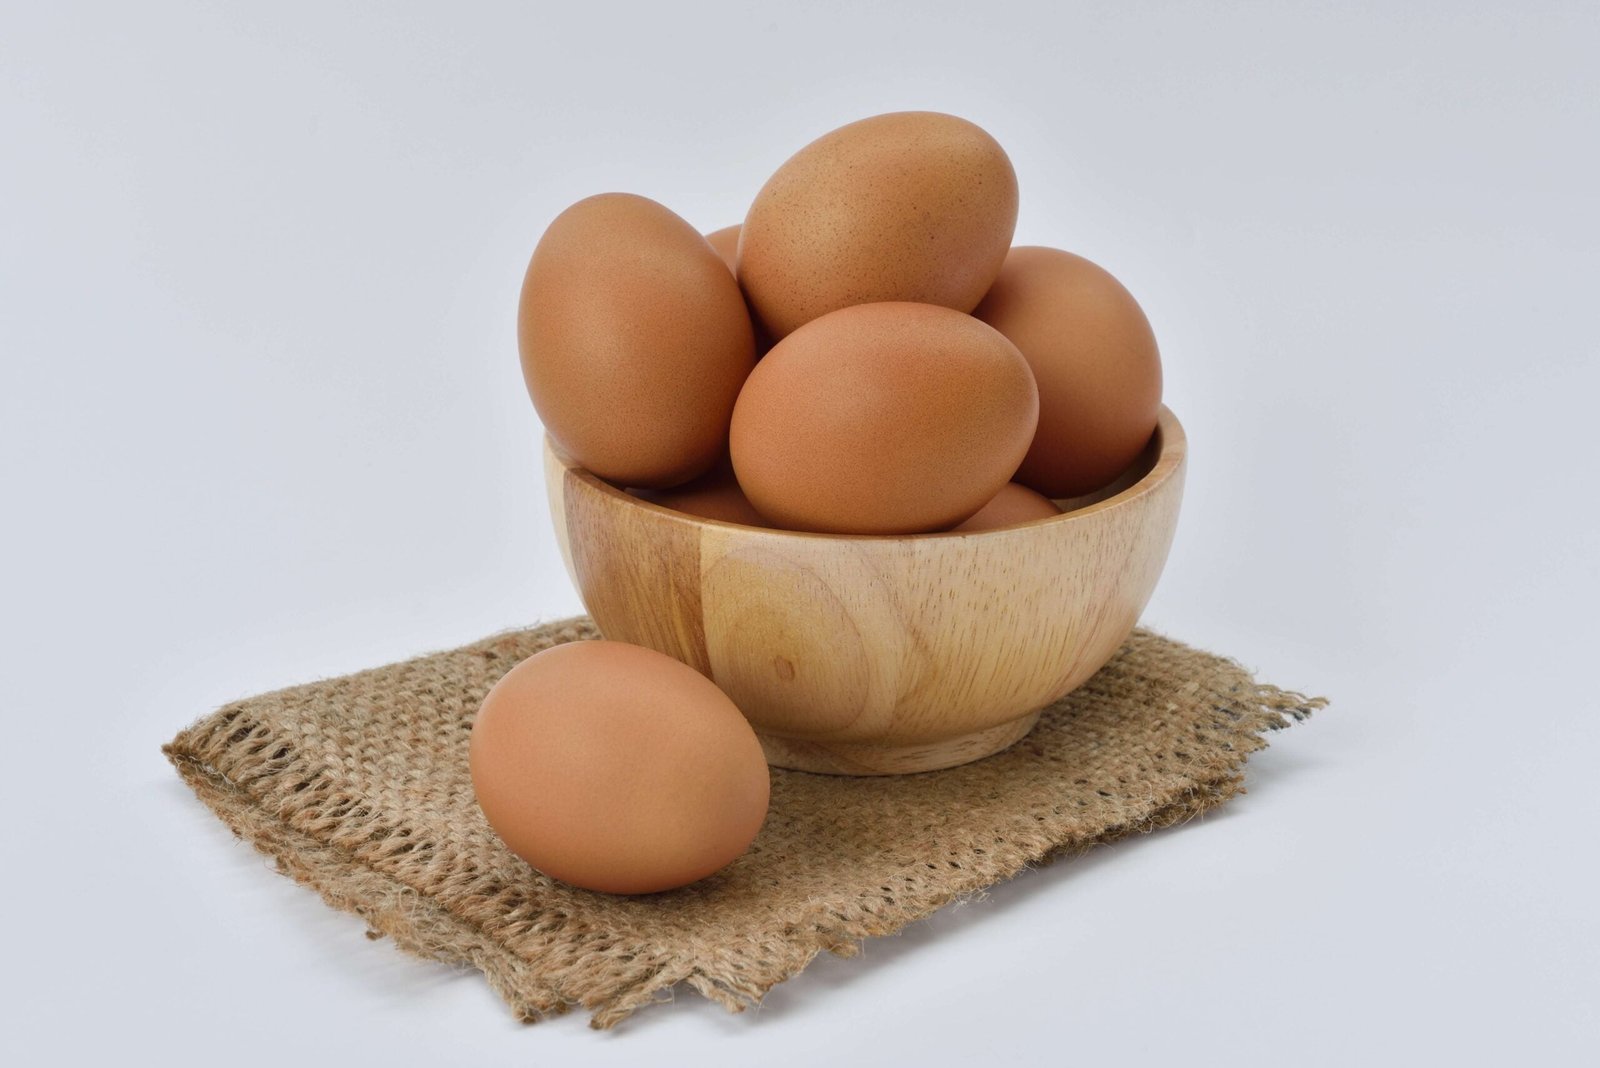 How much protein is in an egg